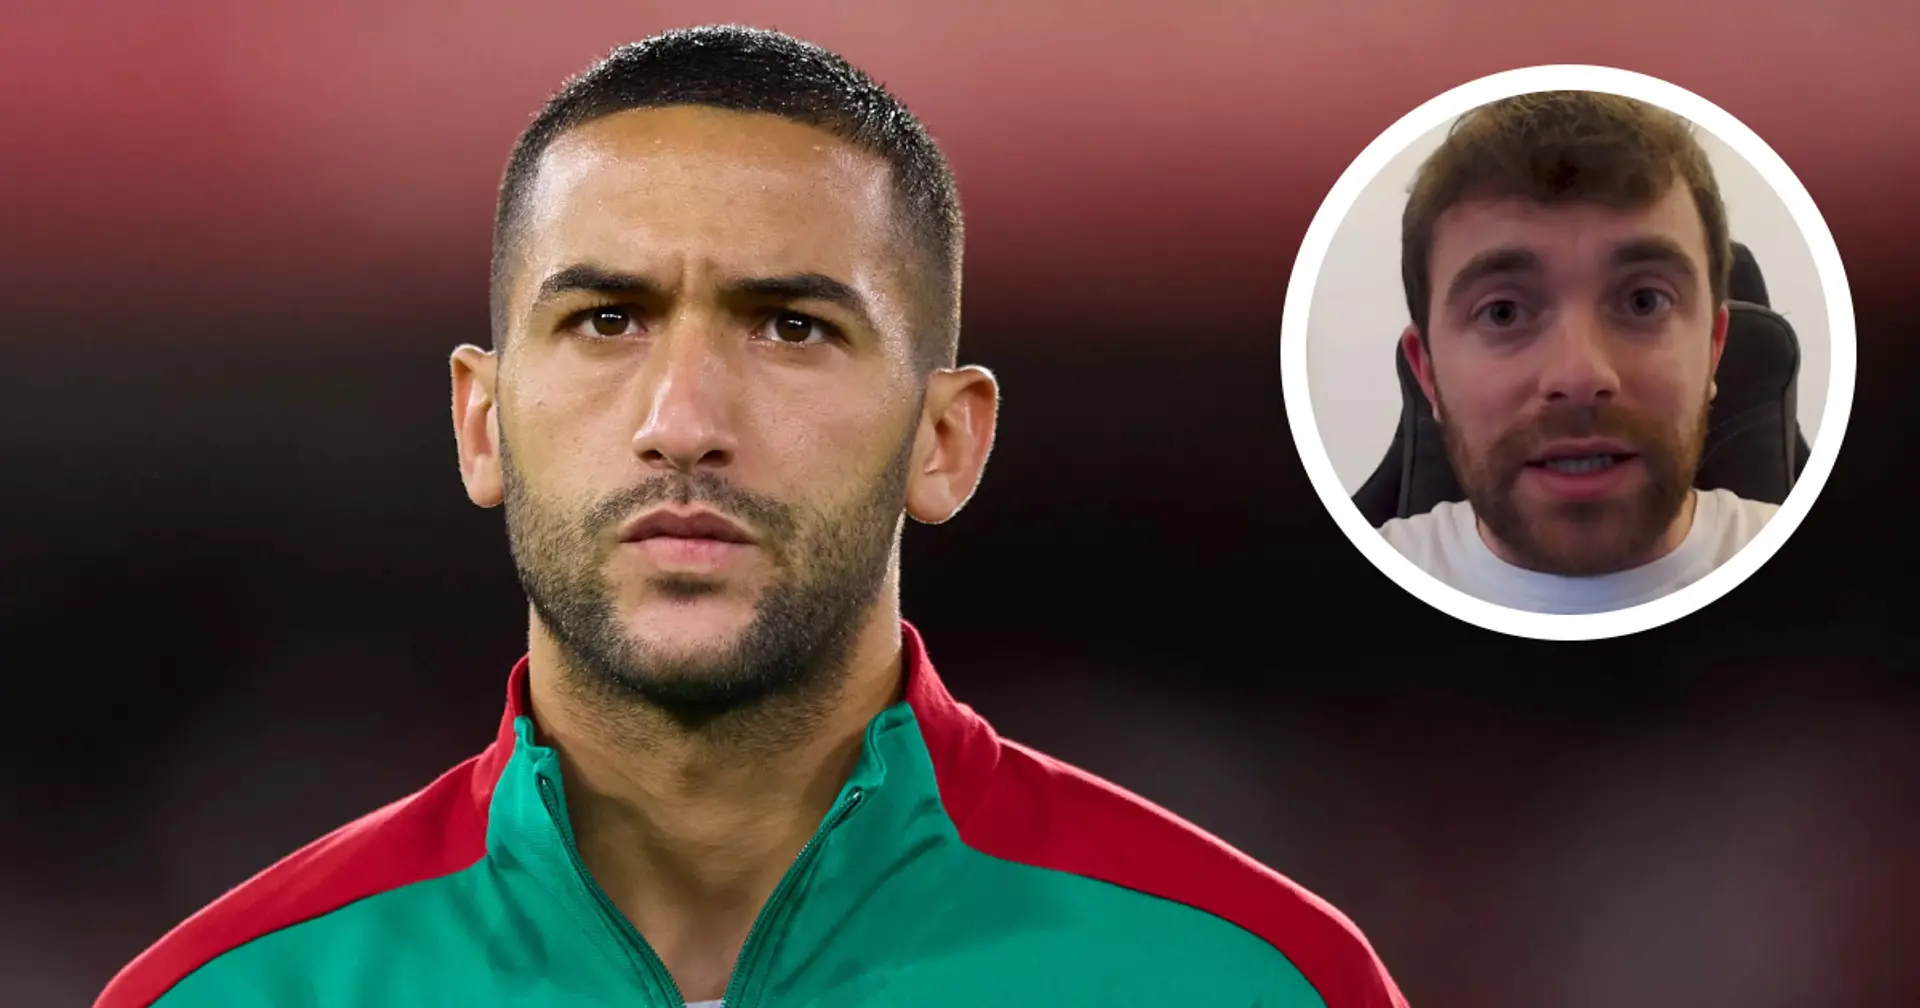 'He will have a serious chance': Romano provides update on Ziyech's future